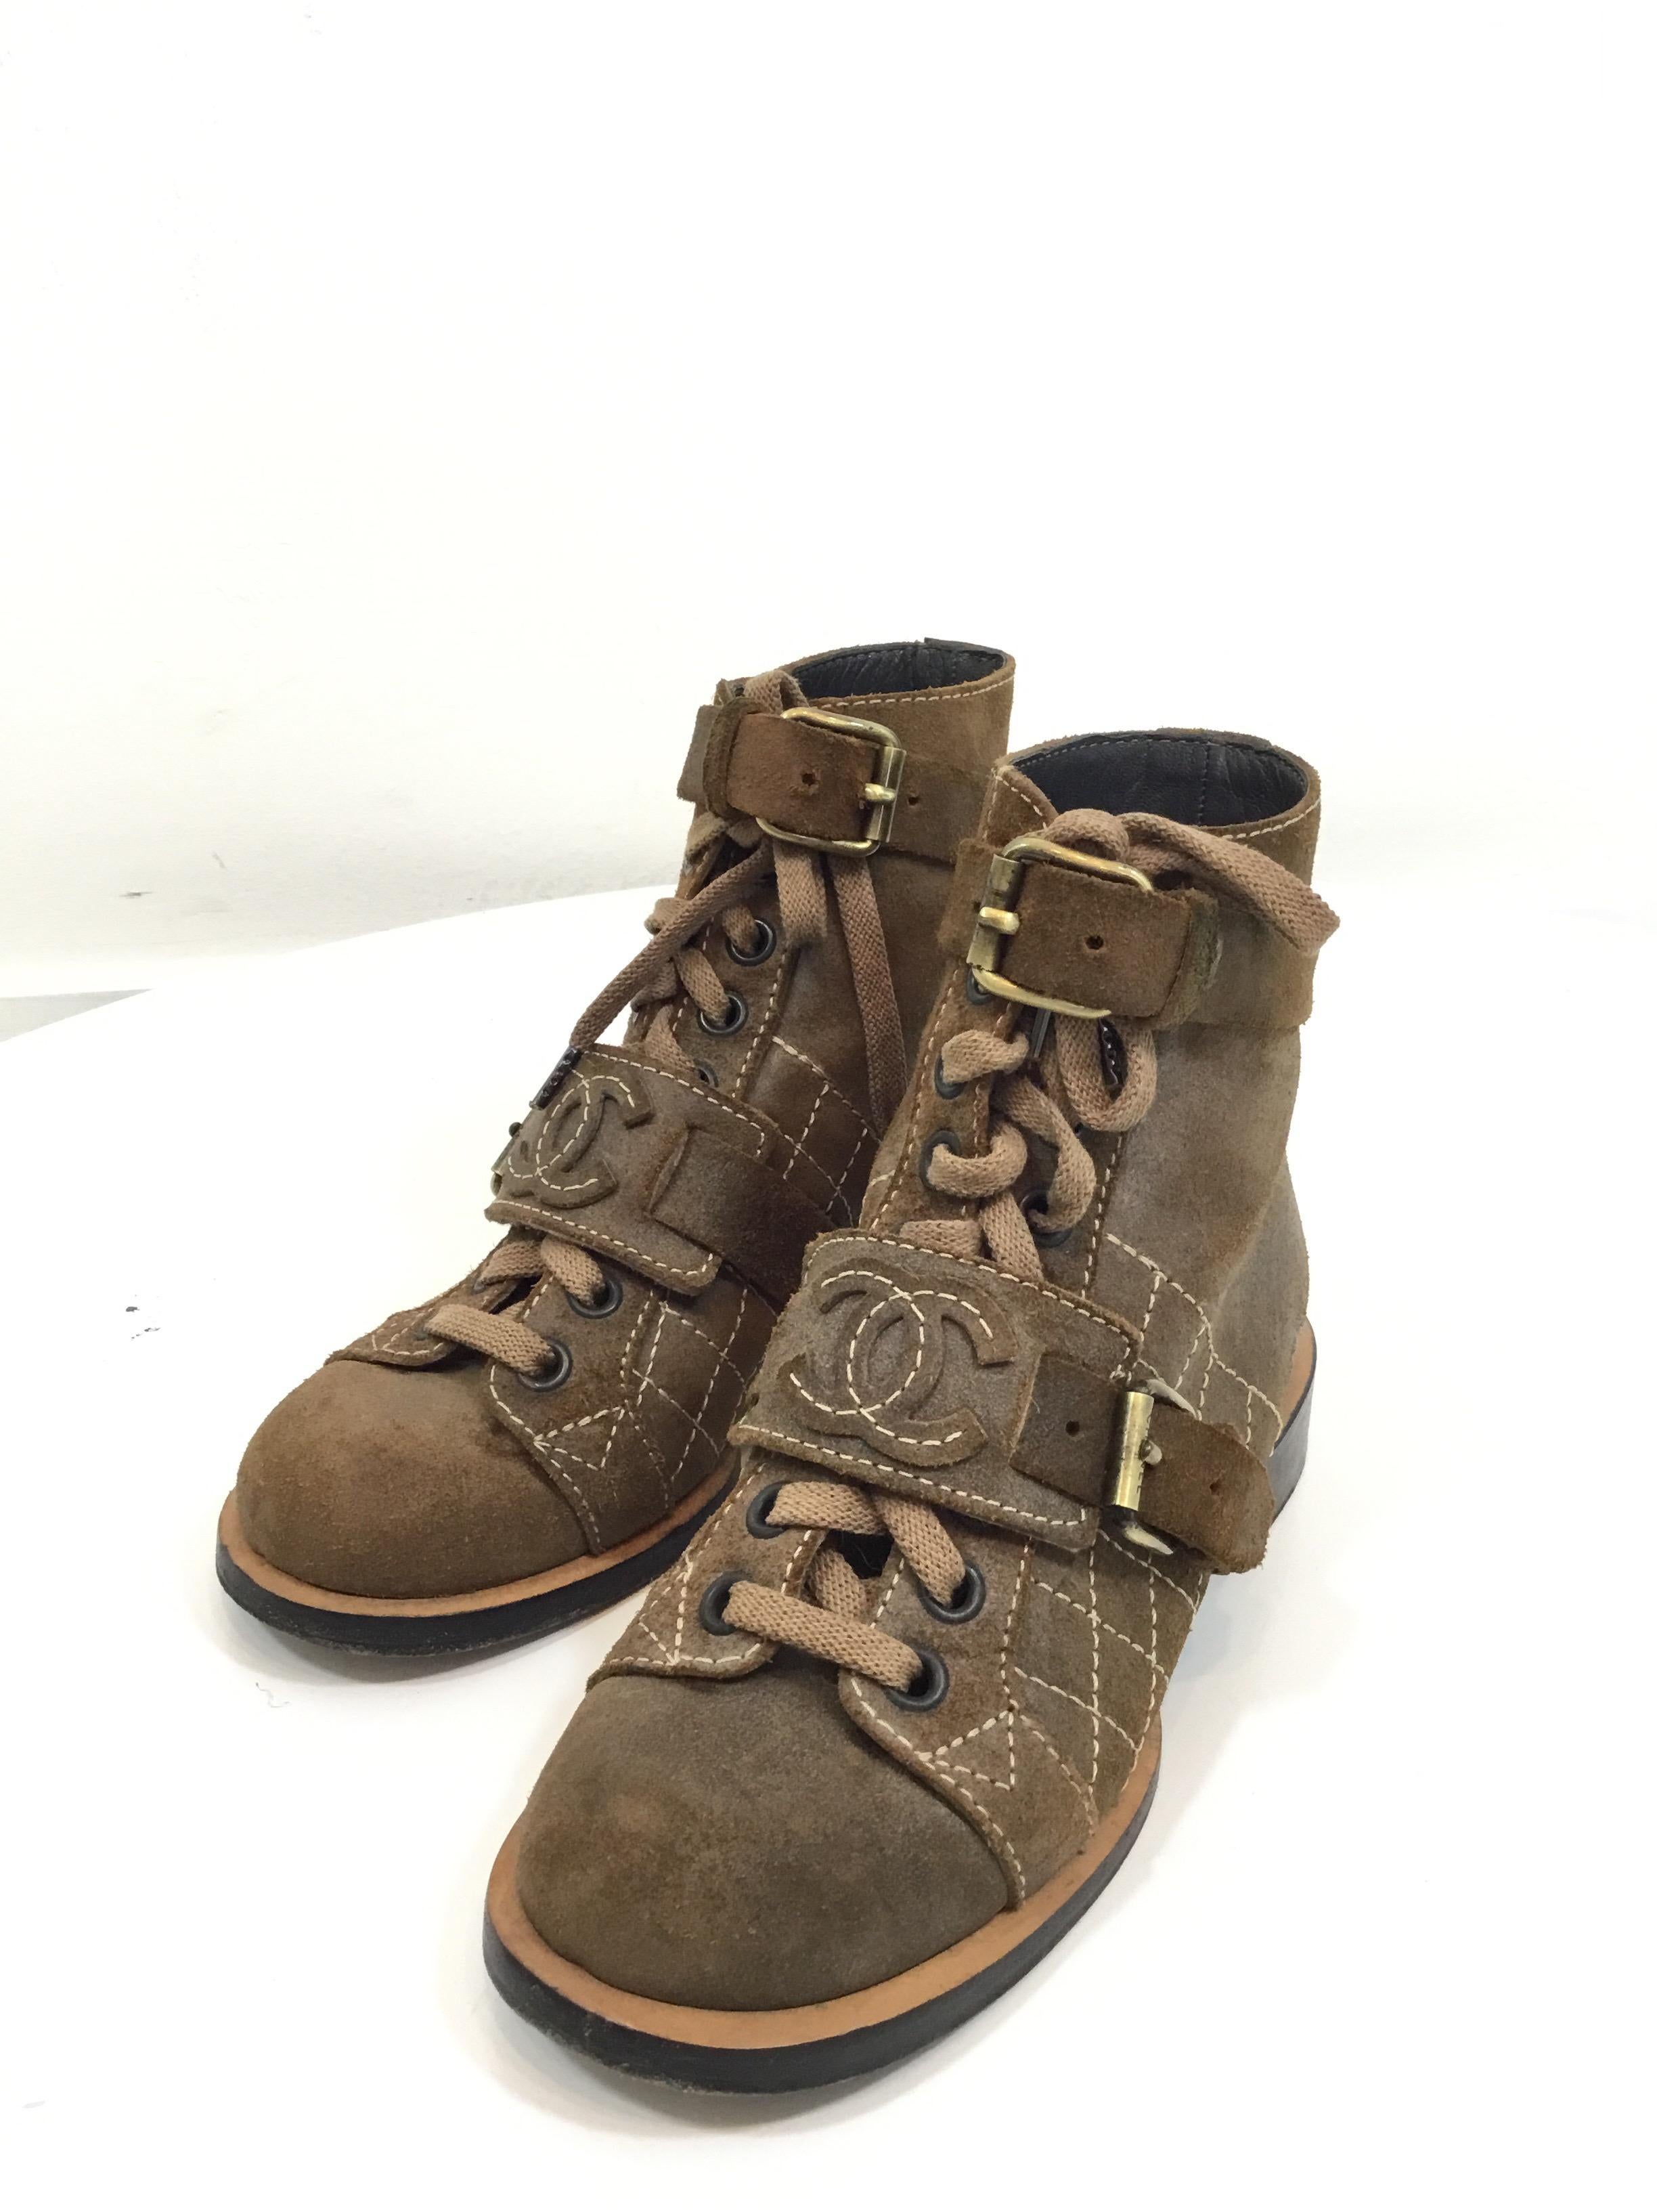 Chanel combat boots featured in a distressed brown suede leather with lace up fastening and a CC stitched buckle across the foot and ankle. Boots are a size 36, made in Italy. Shaft 5”, heel 1”, leather soles. Dust bags are included.